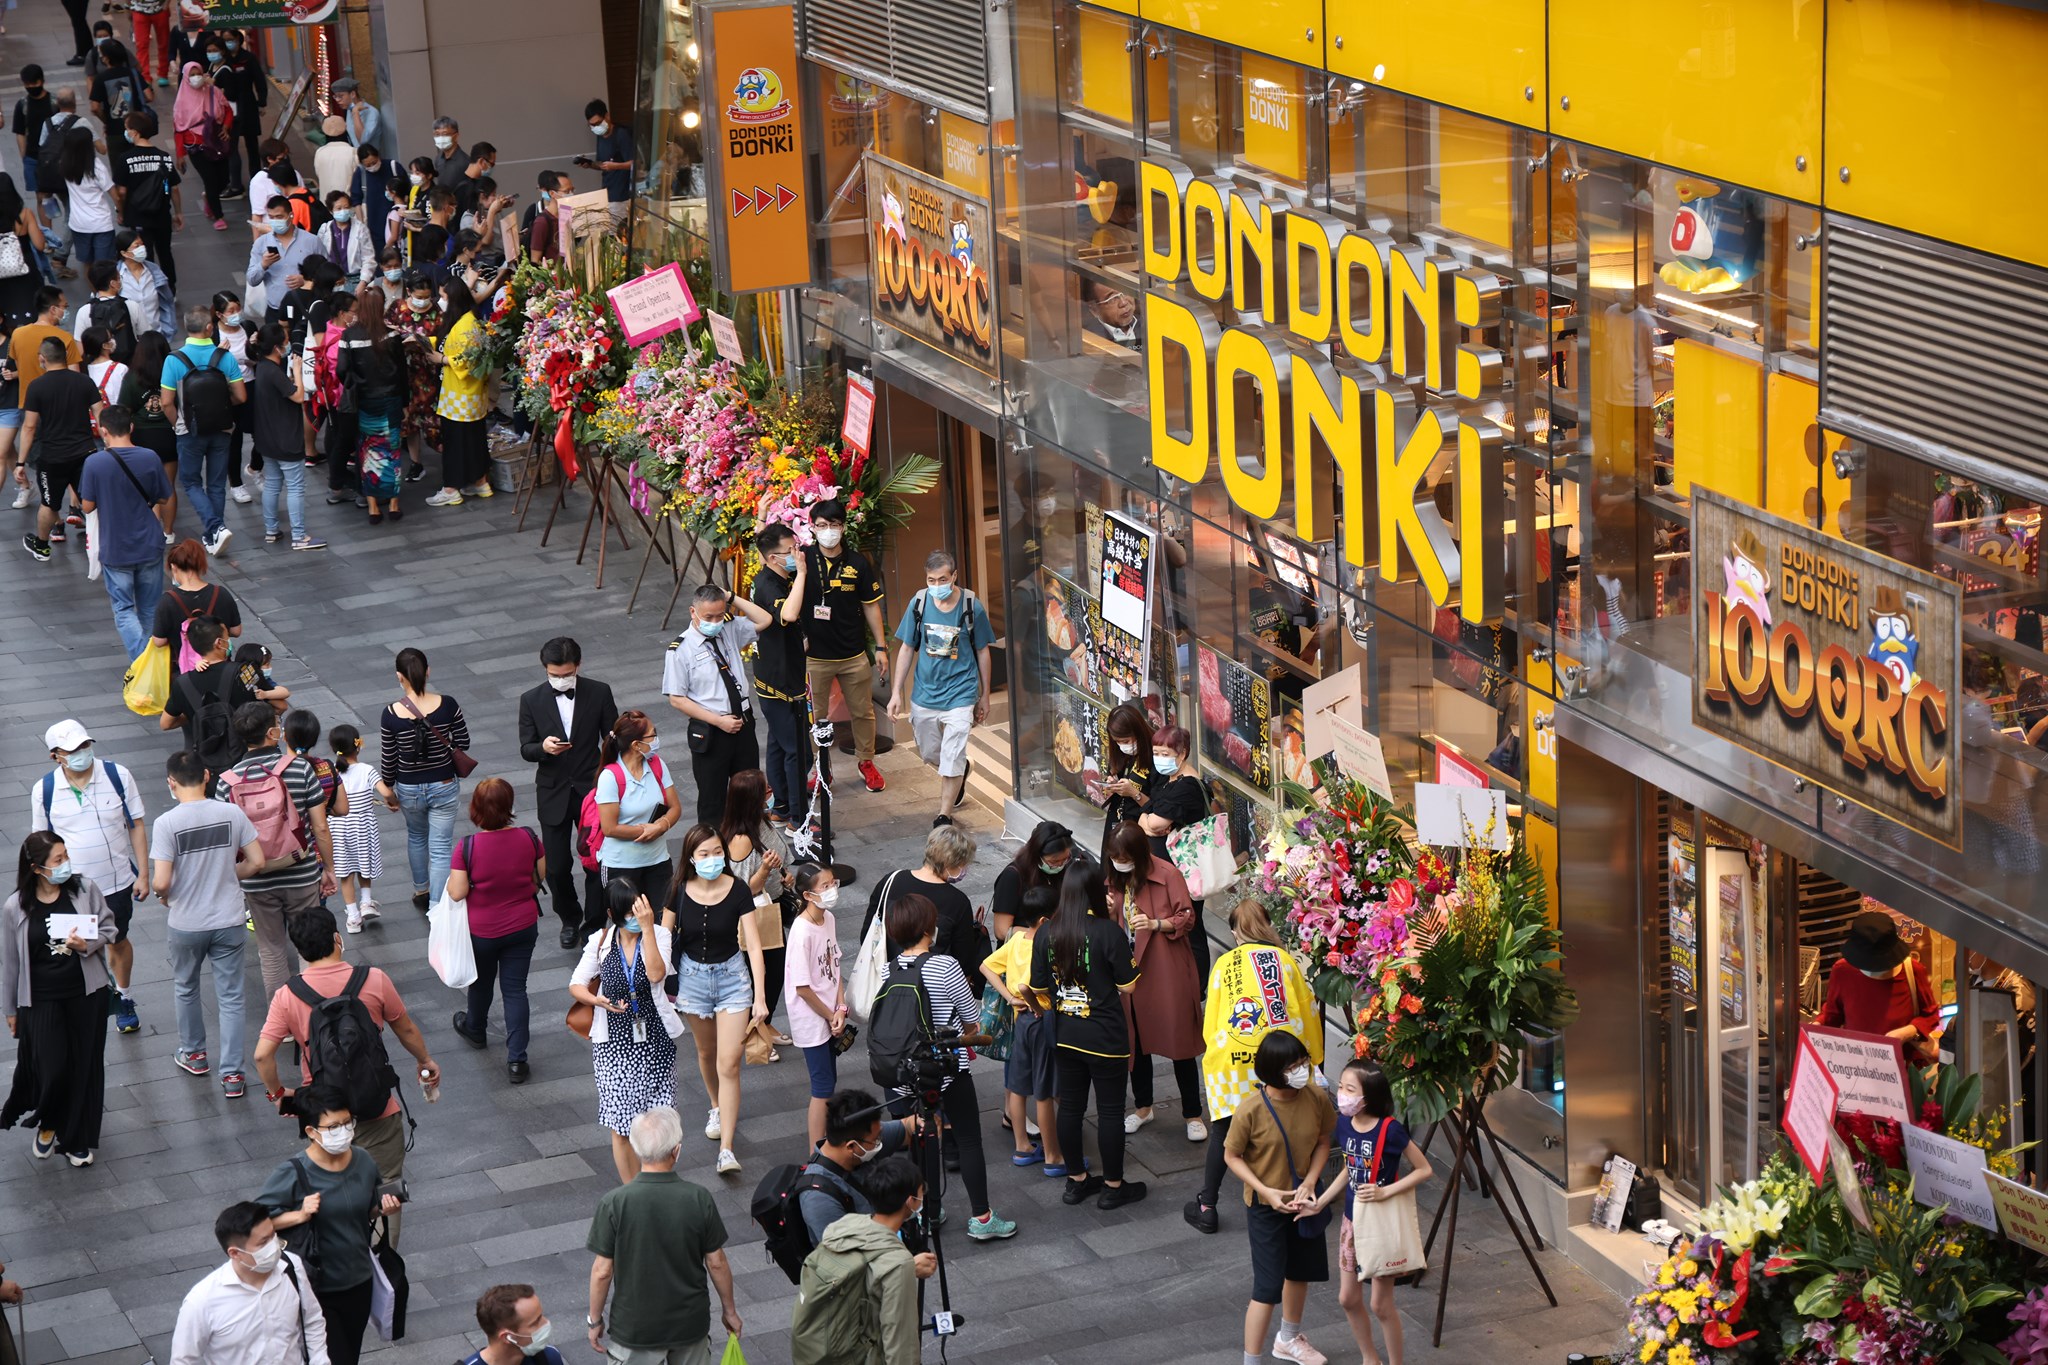 The opening of Don Don Donki in Central attracted throngs of excited shoppers. Photo via Facebook/Don Don Donki